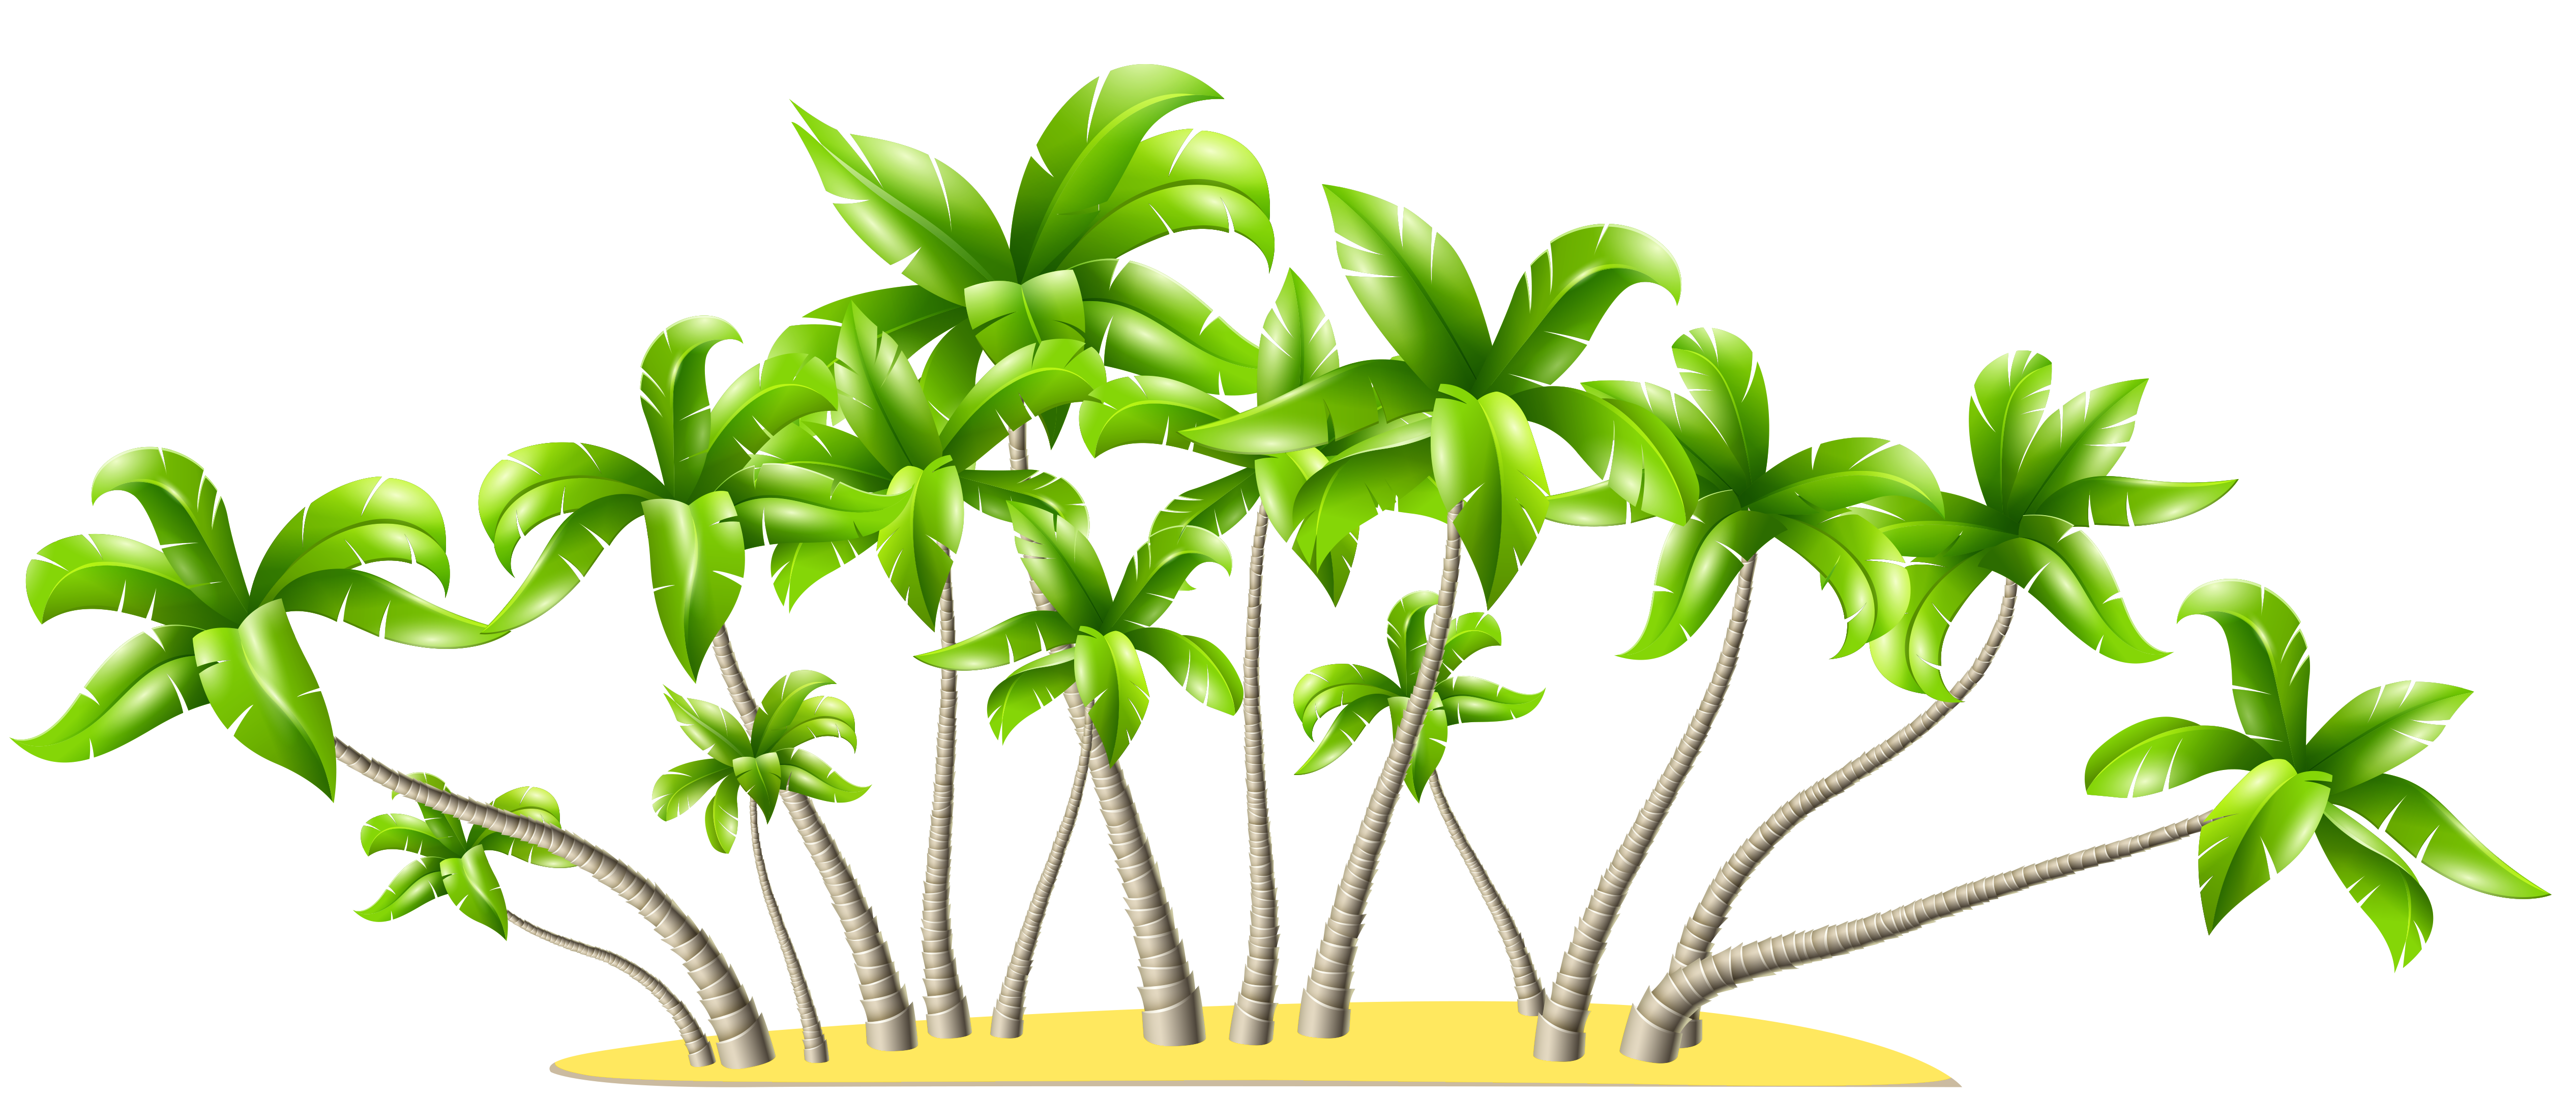 Palm clipart border. Trees png gallery yopriceville